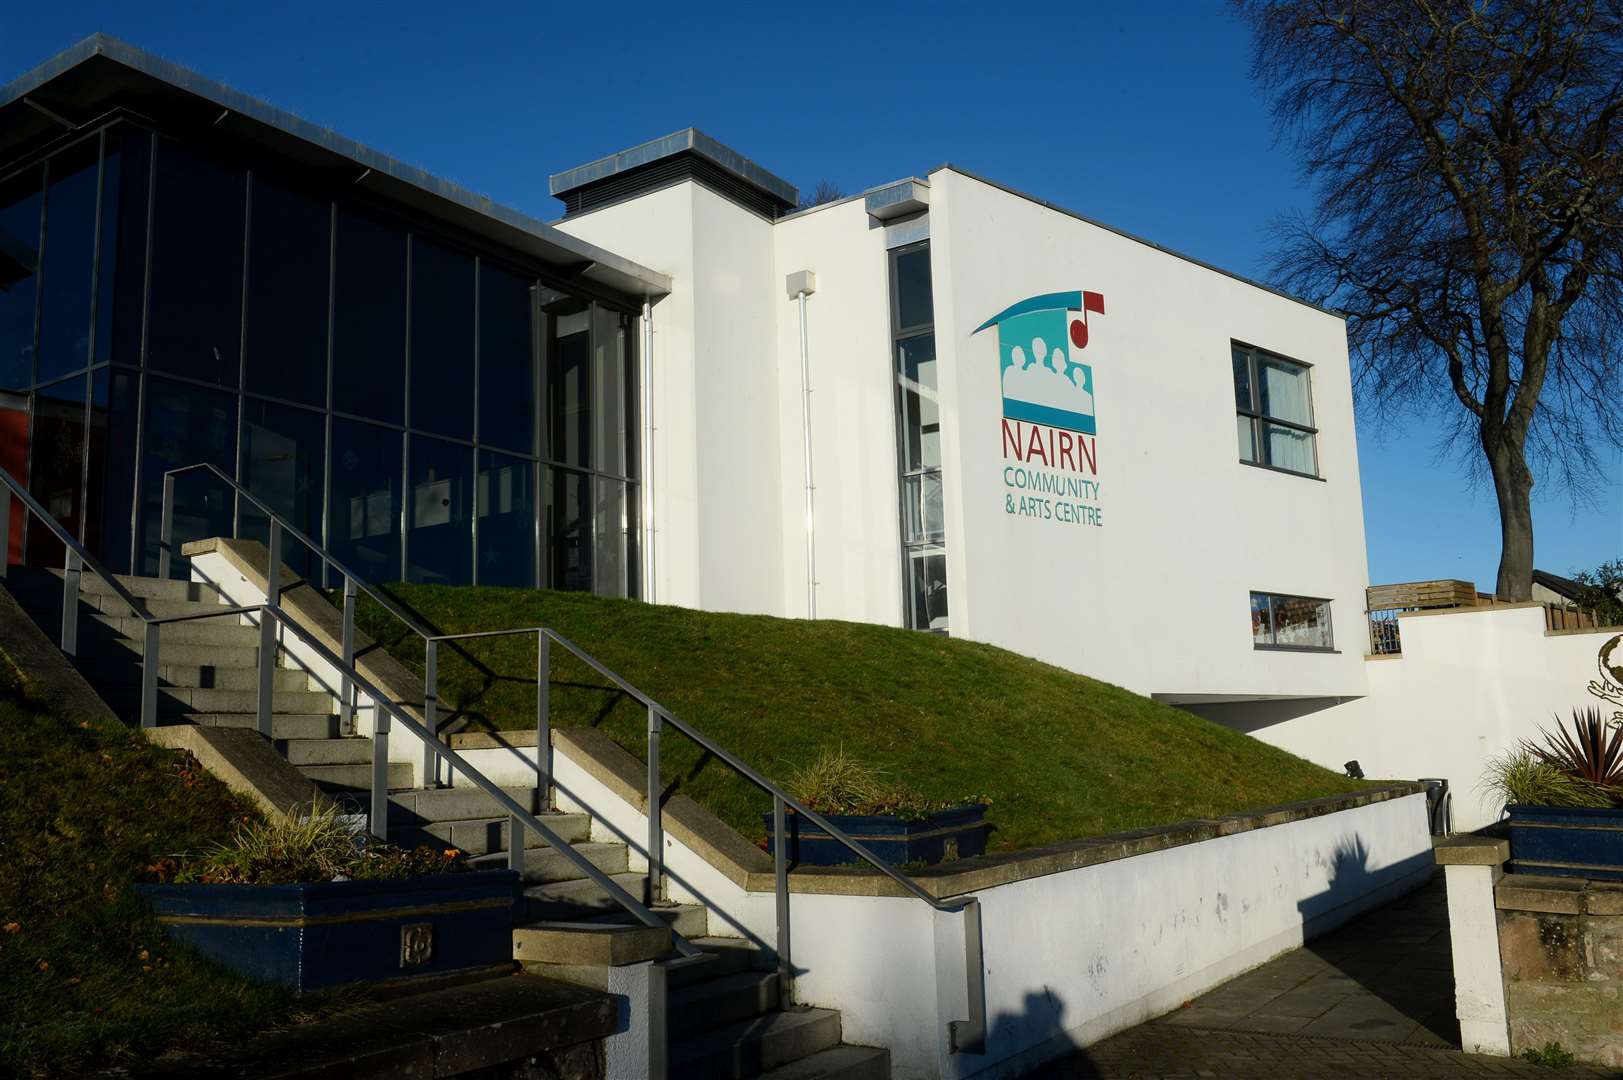 The Nairn Community and Arts Centre provides the location for the meeting.